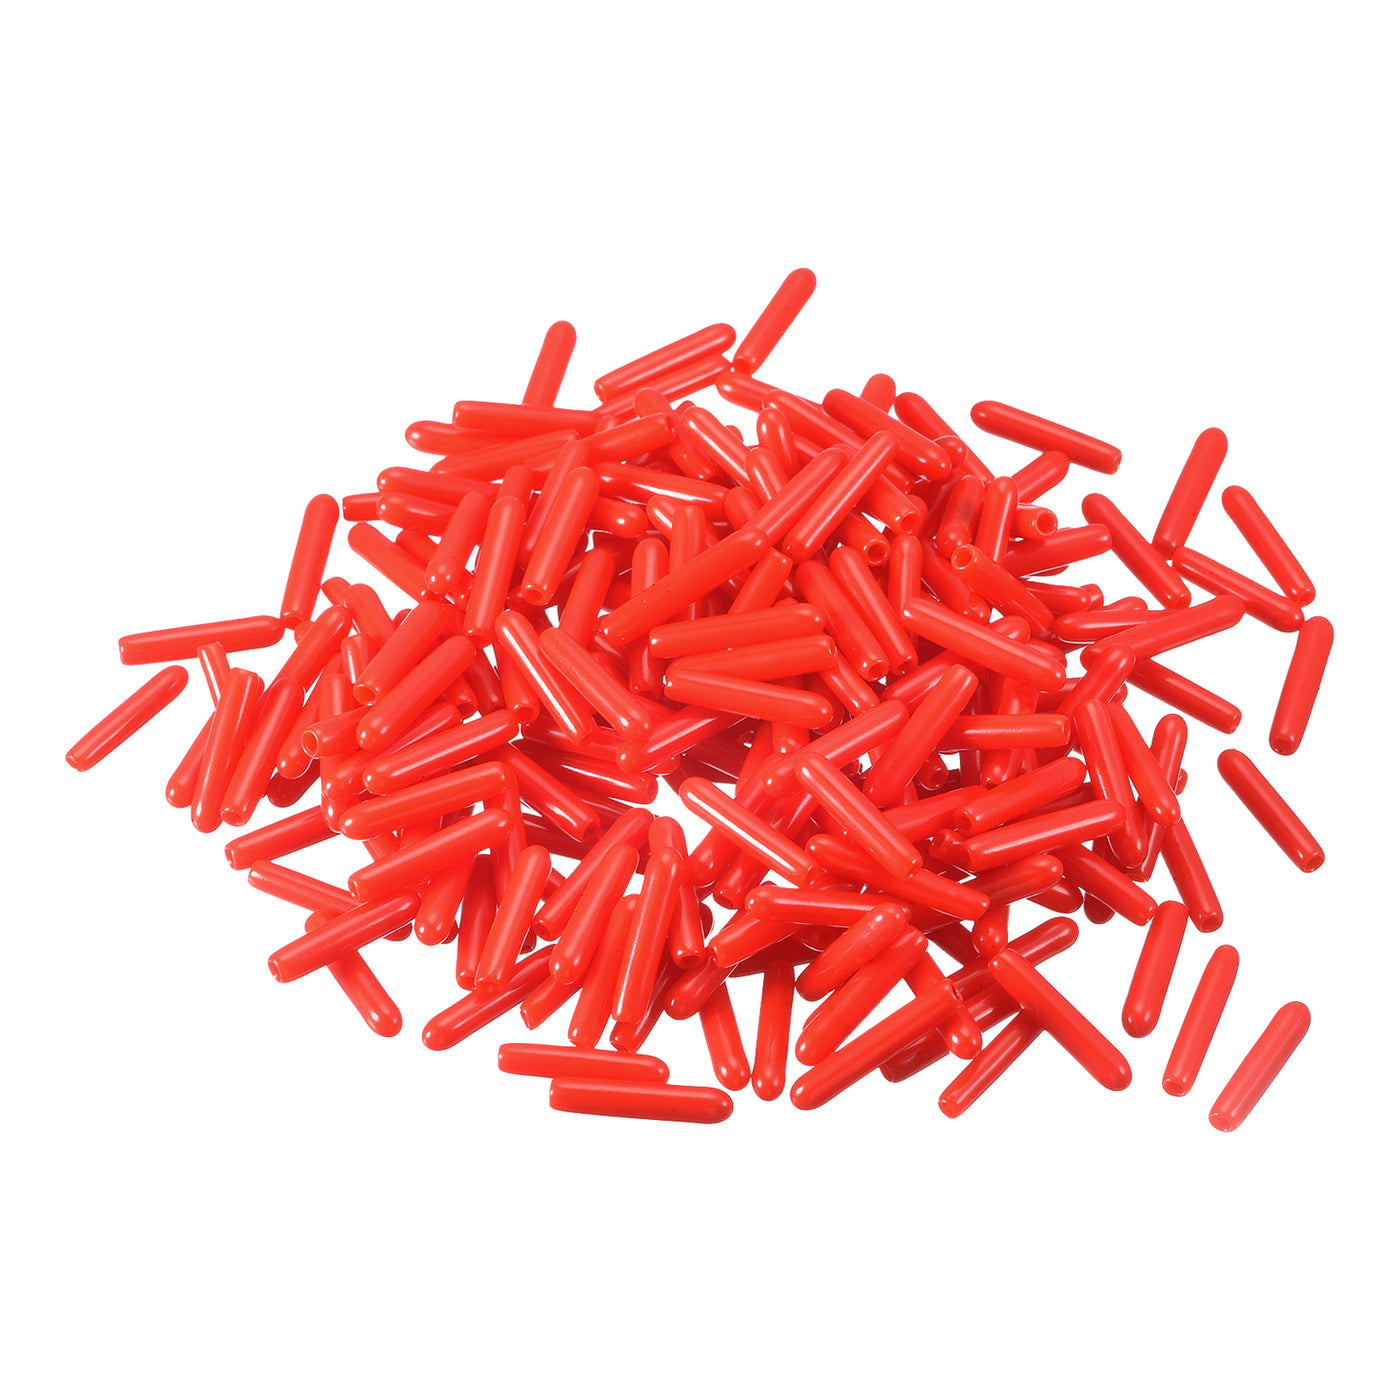 uxcell Uxcell Rubber End Caps, 240Pcs 1.8mm Screw Thread Protector for Tube Bolt Cover, Red